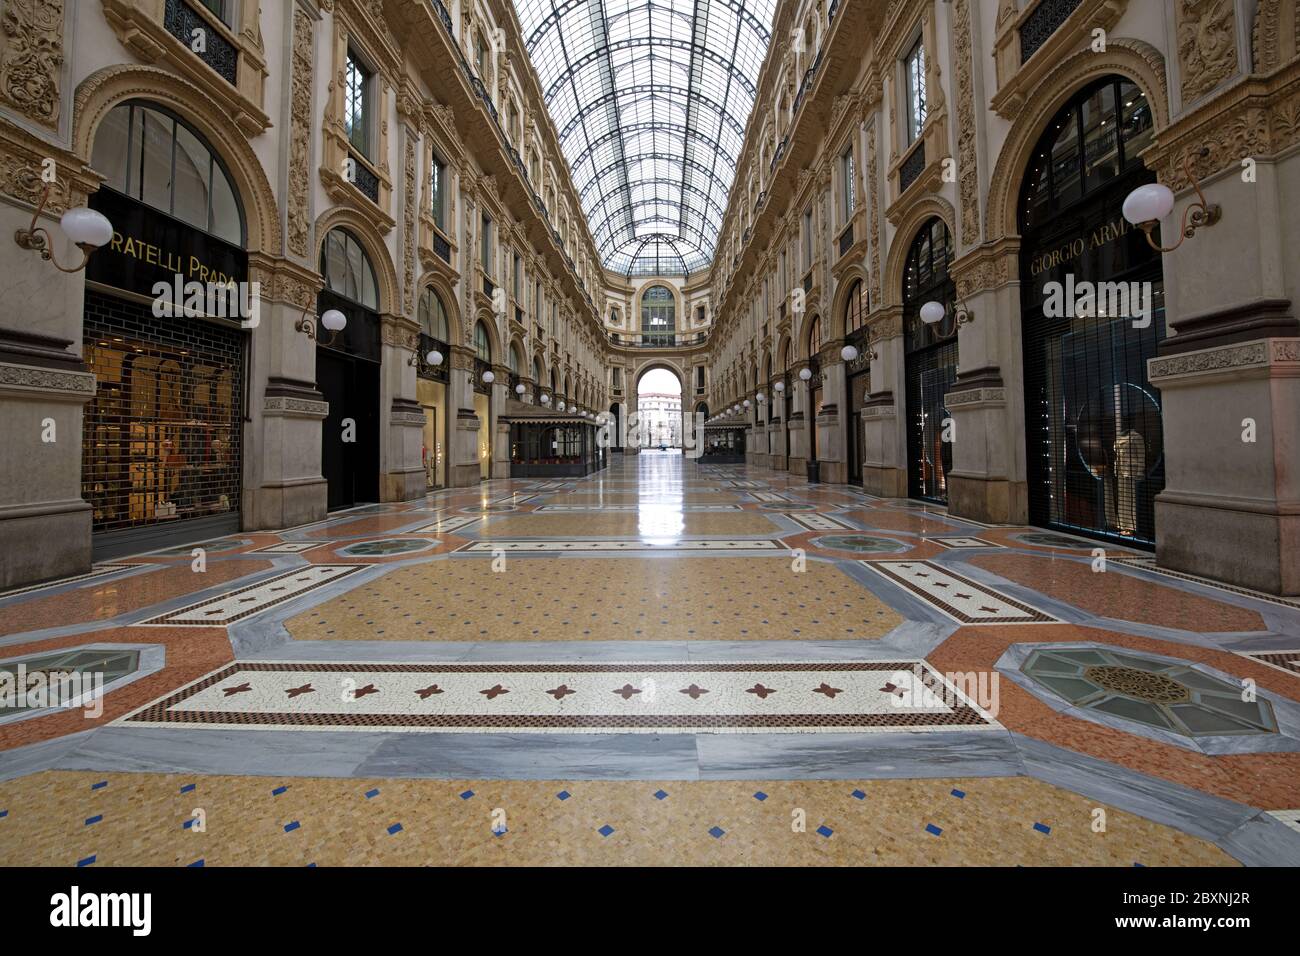 The emptiness of Galleria Vittorio Emanuele with shops closed during the lockdown caused by the Covid-19 in Milan, Italy. Stock Photo